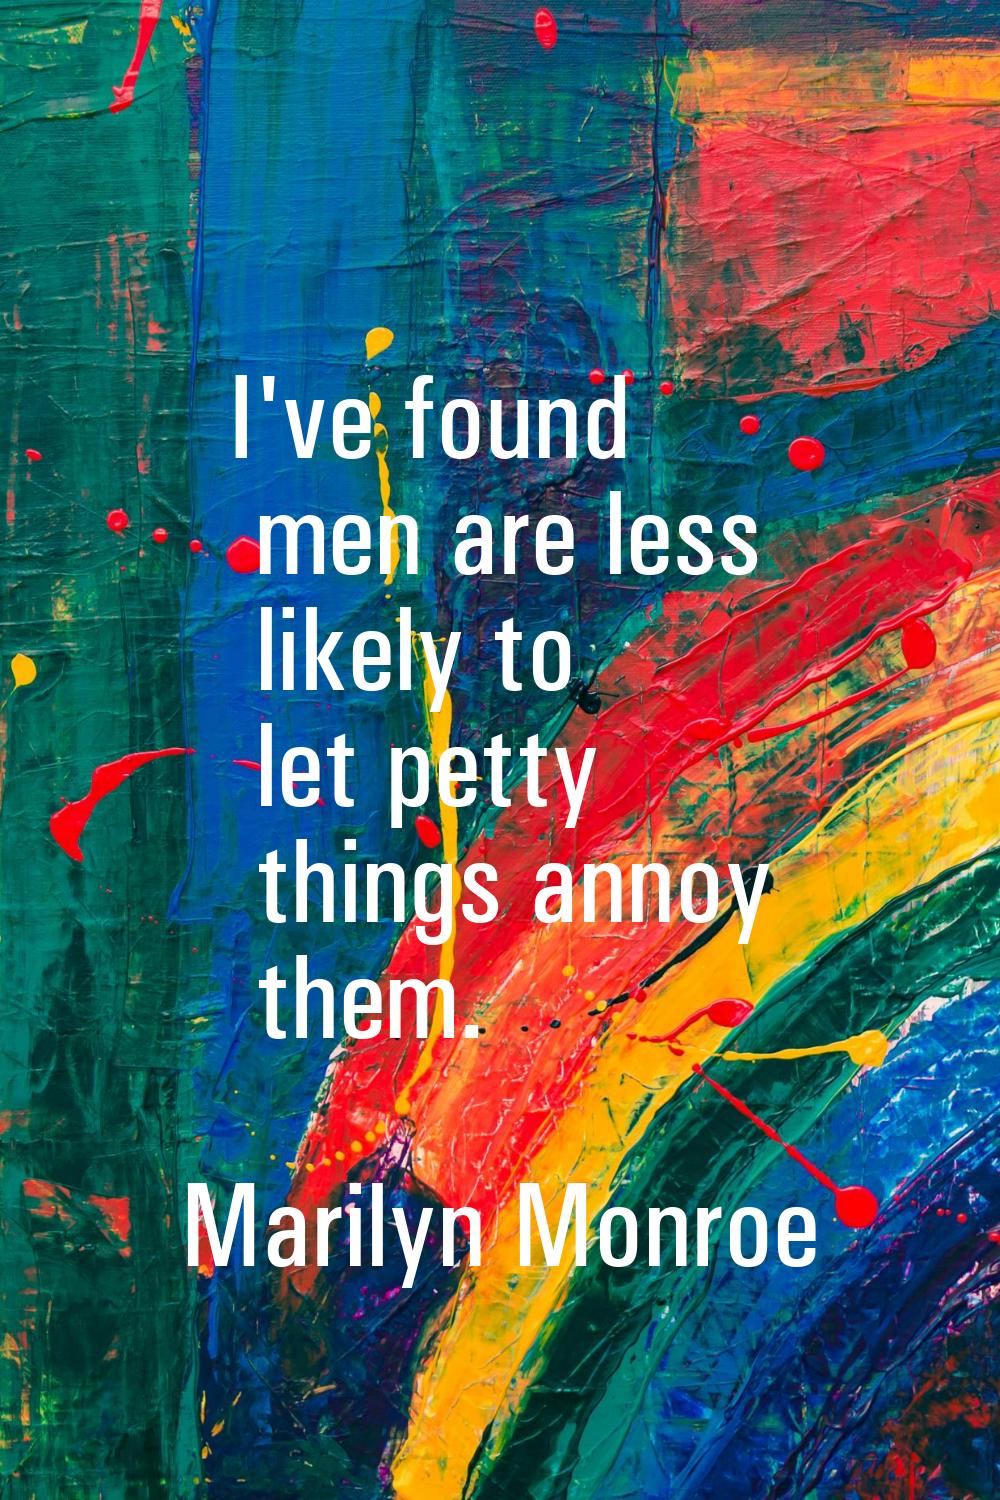 I've found men are less likely to let petty things annoy them.